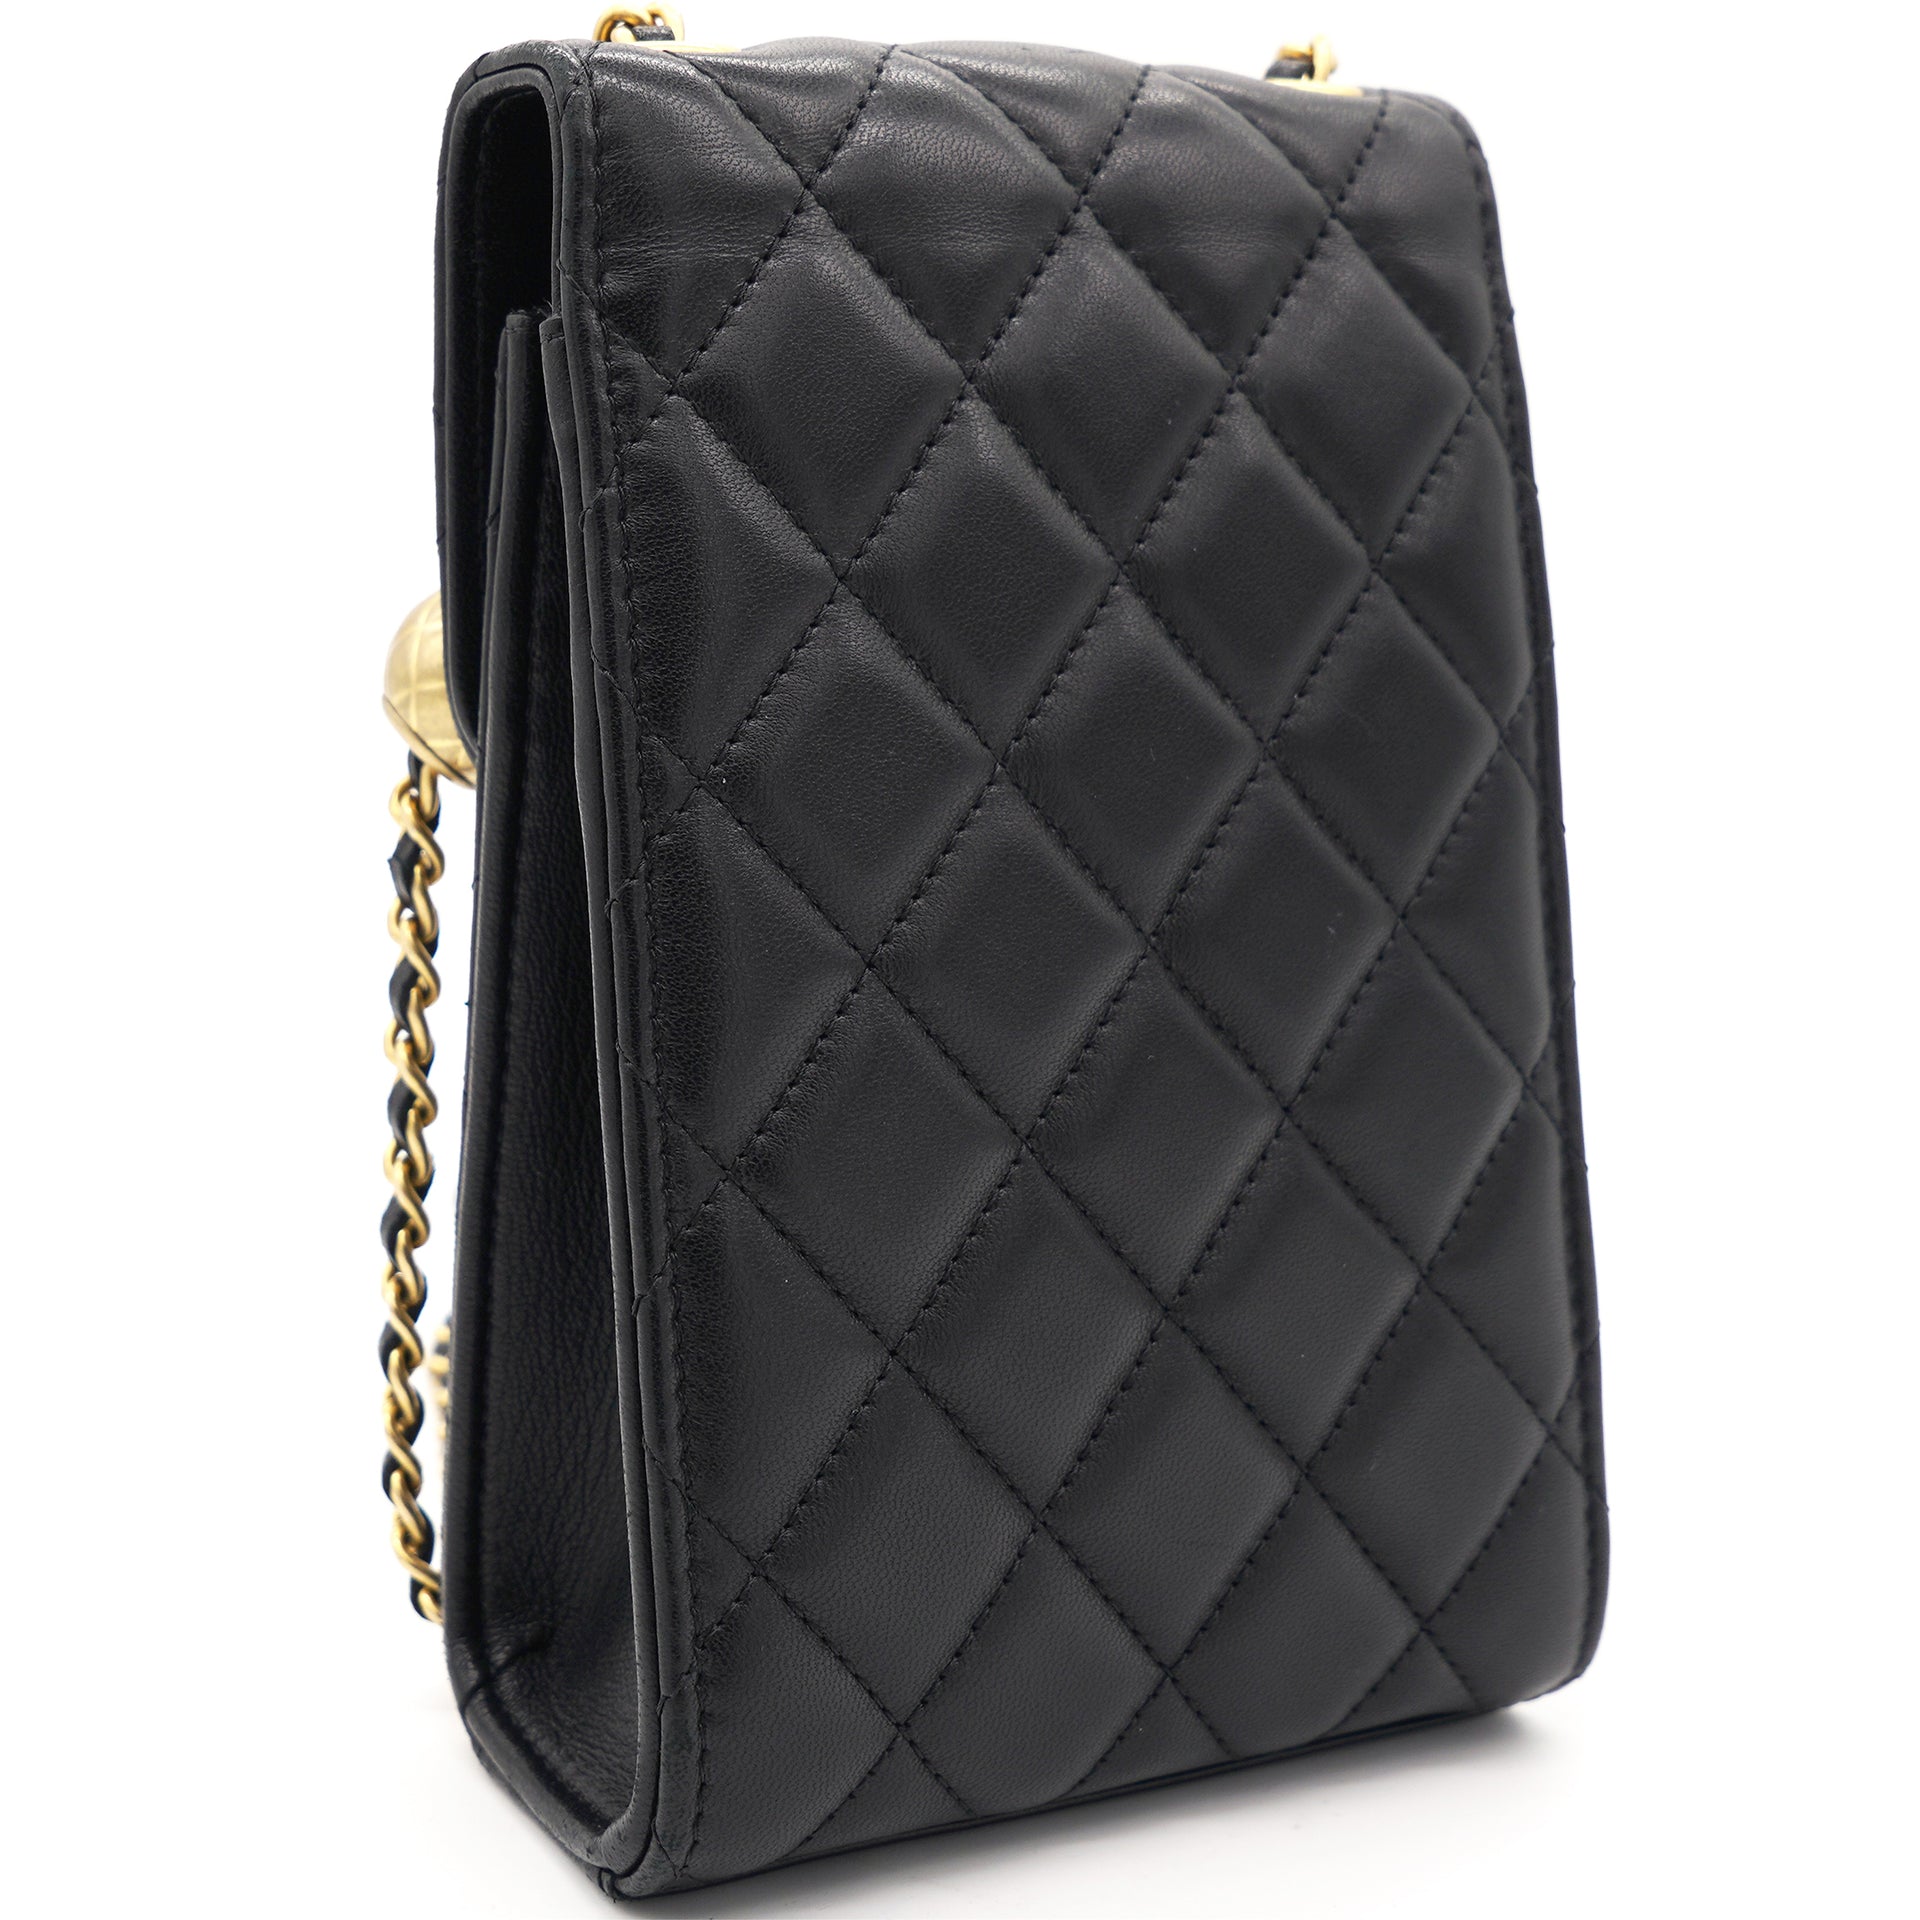 Chanel Reissue 2.55 black pearlescent quilted lambskin clutch